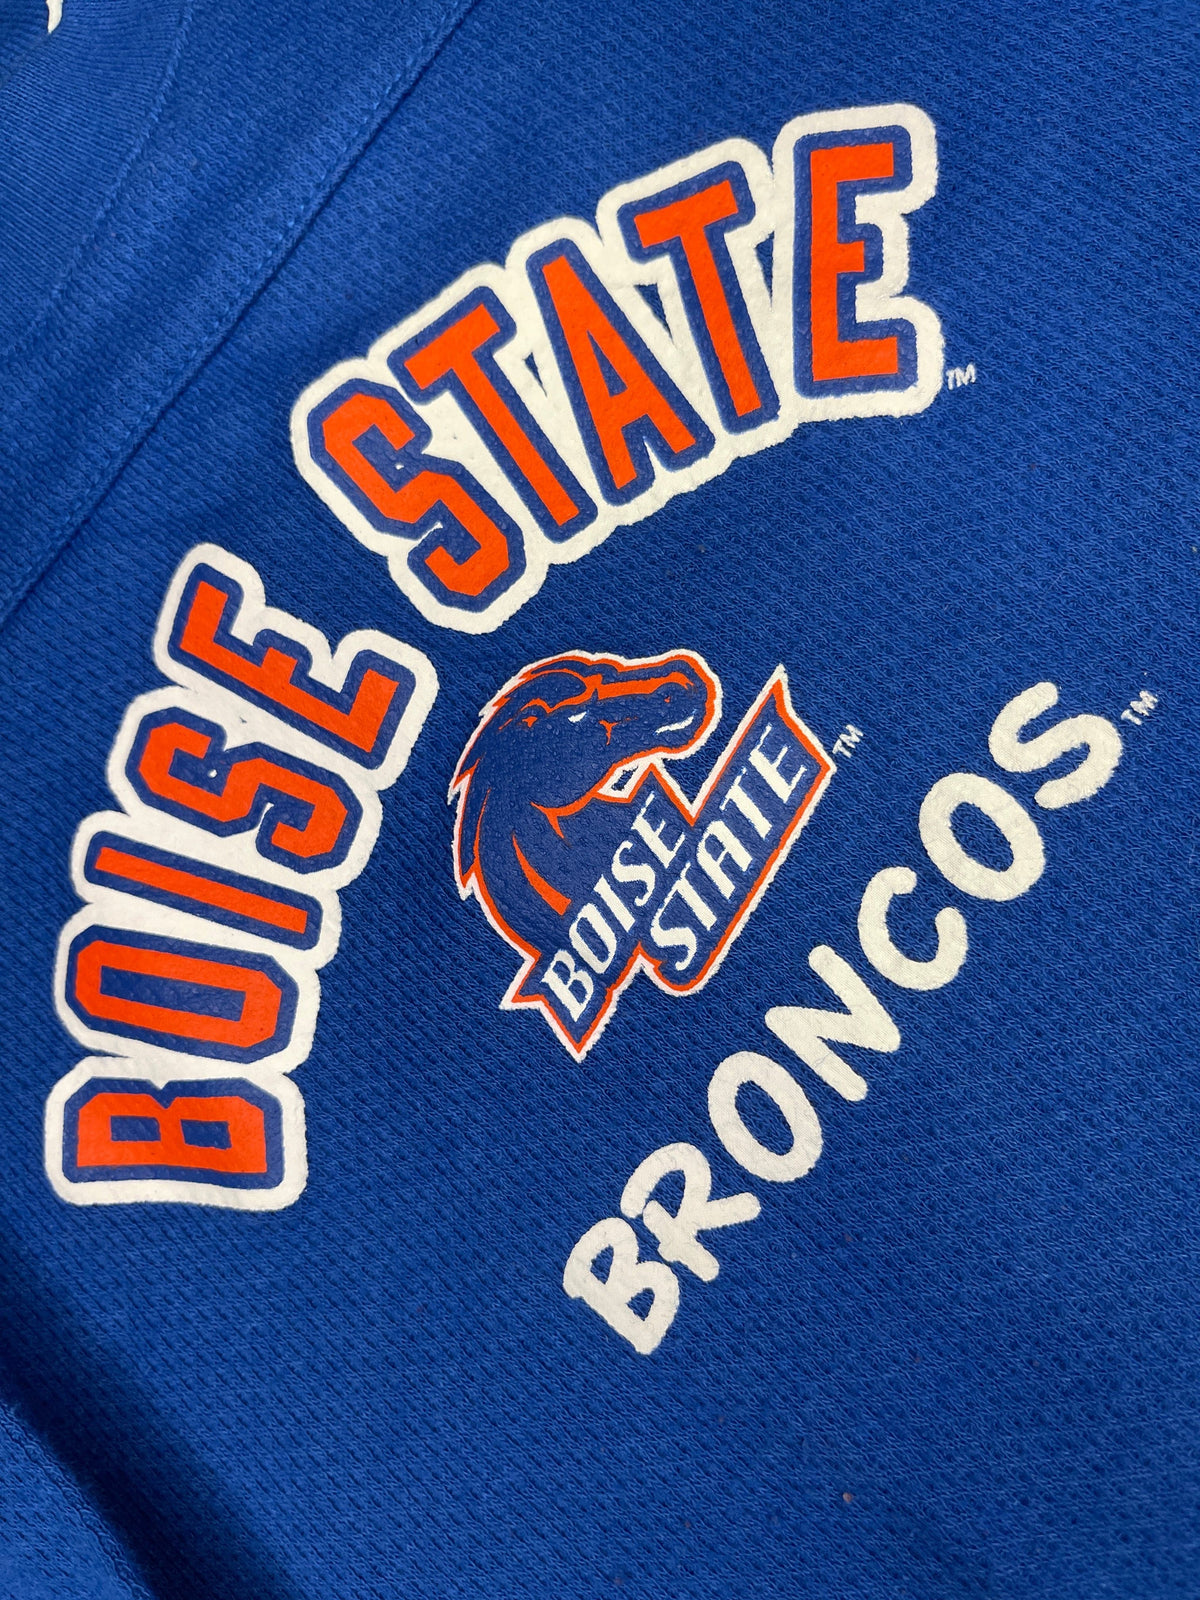 NCAA Boise State Broncos L/S Thermal Baby Infant Bodysuit 12 Months